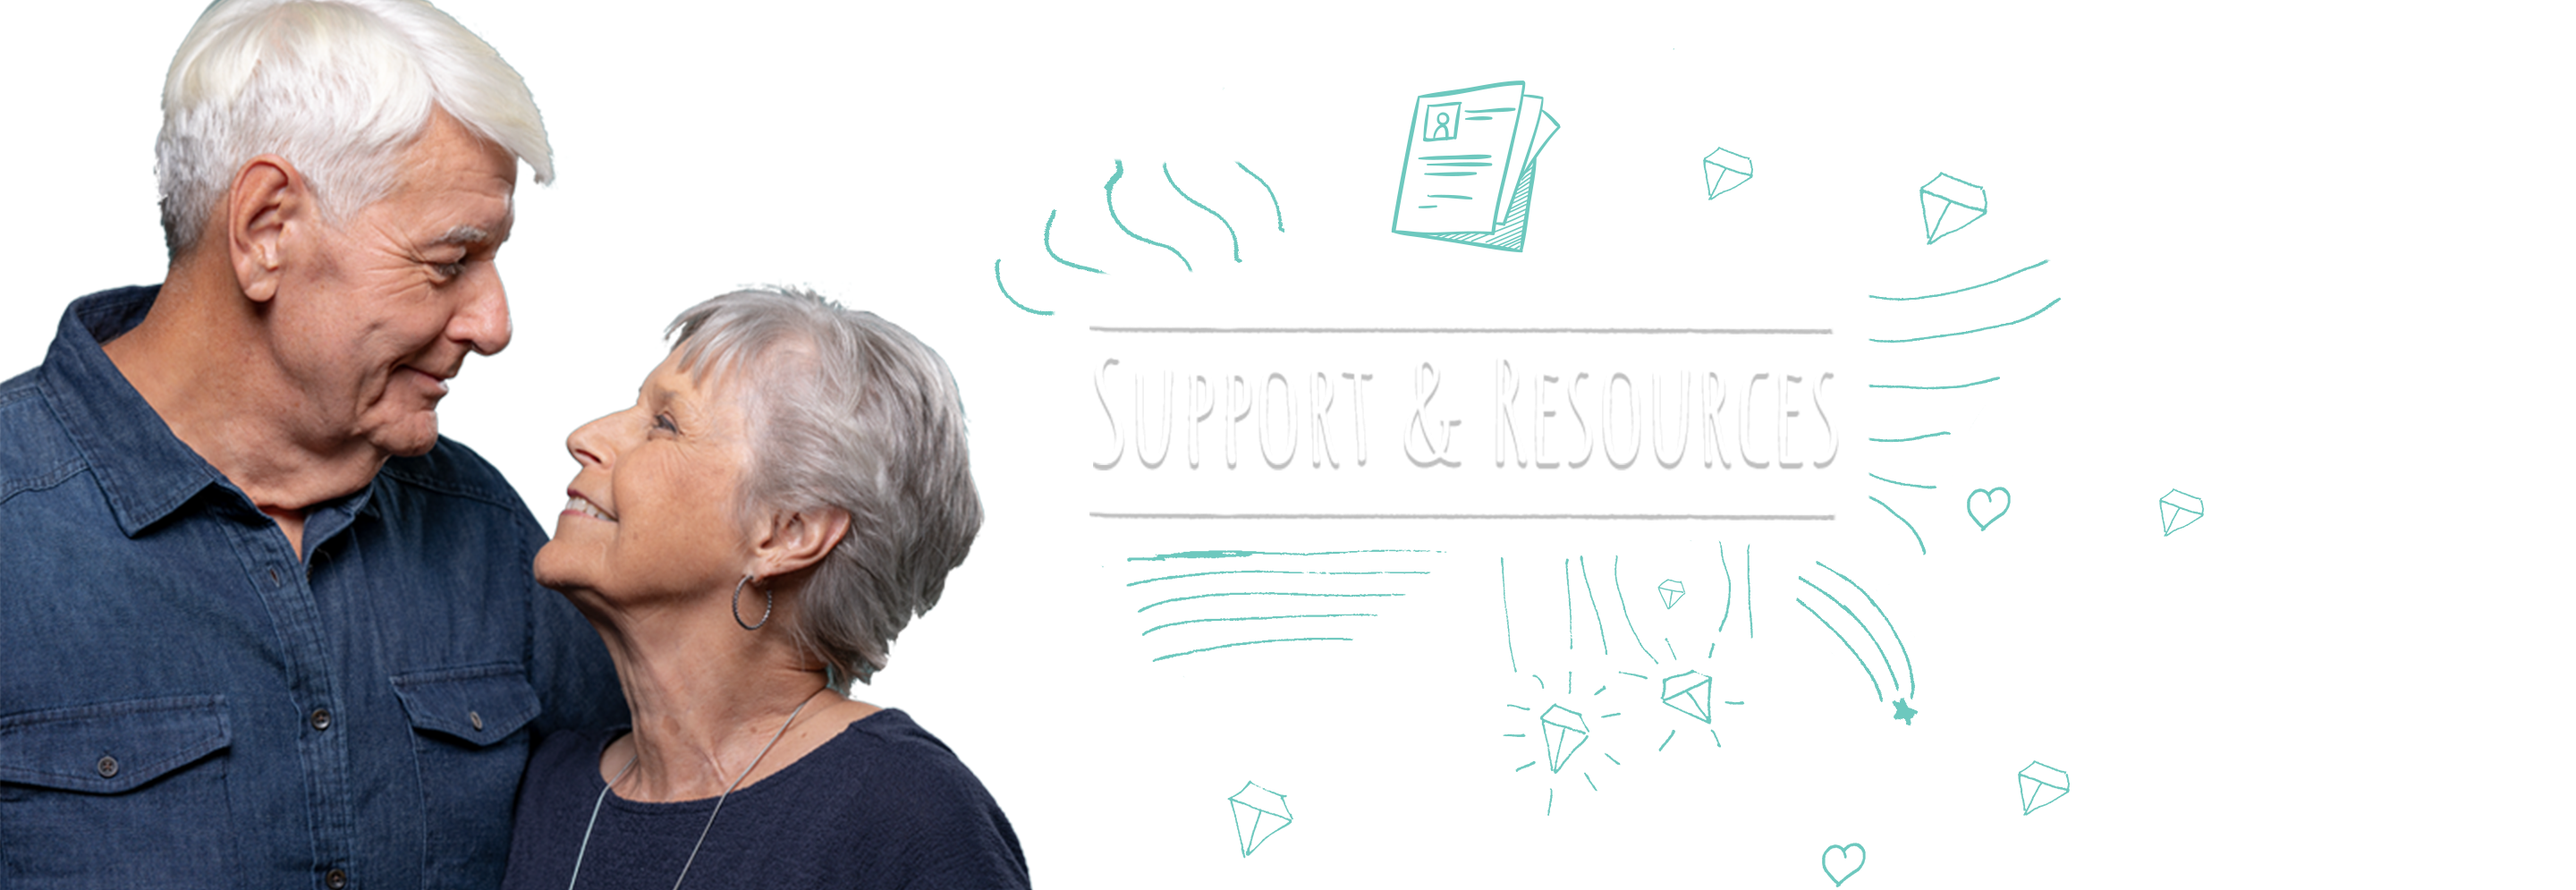 Support & Resources